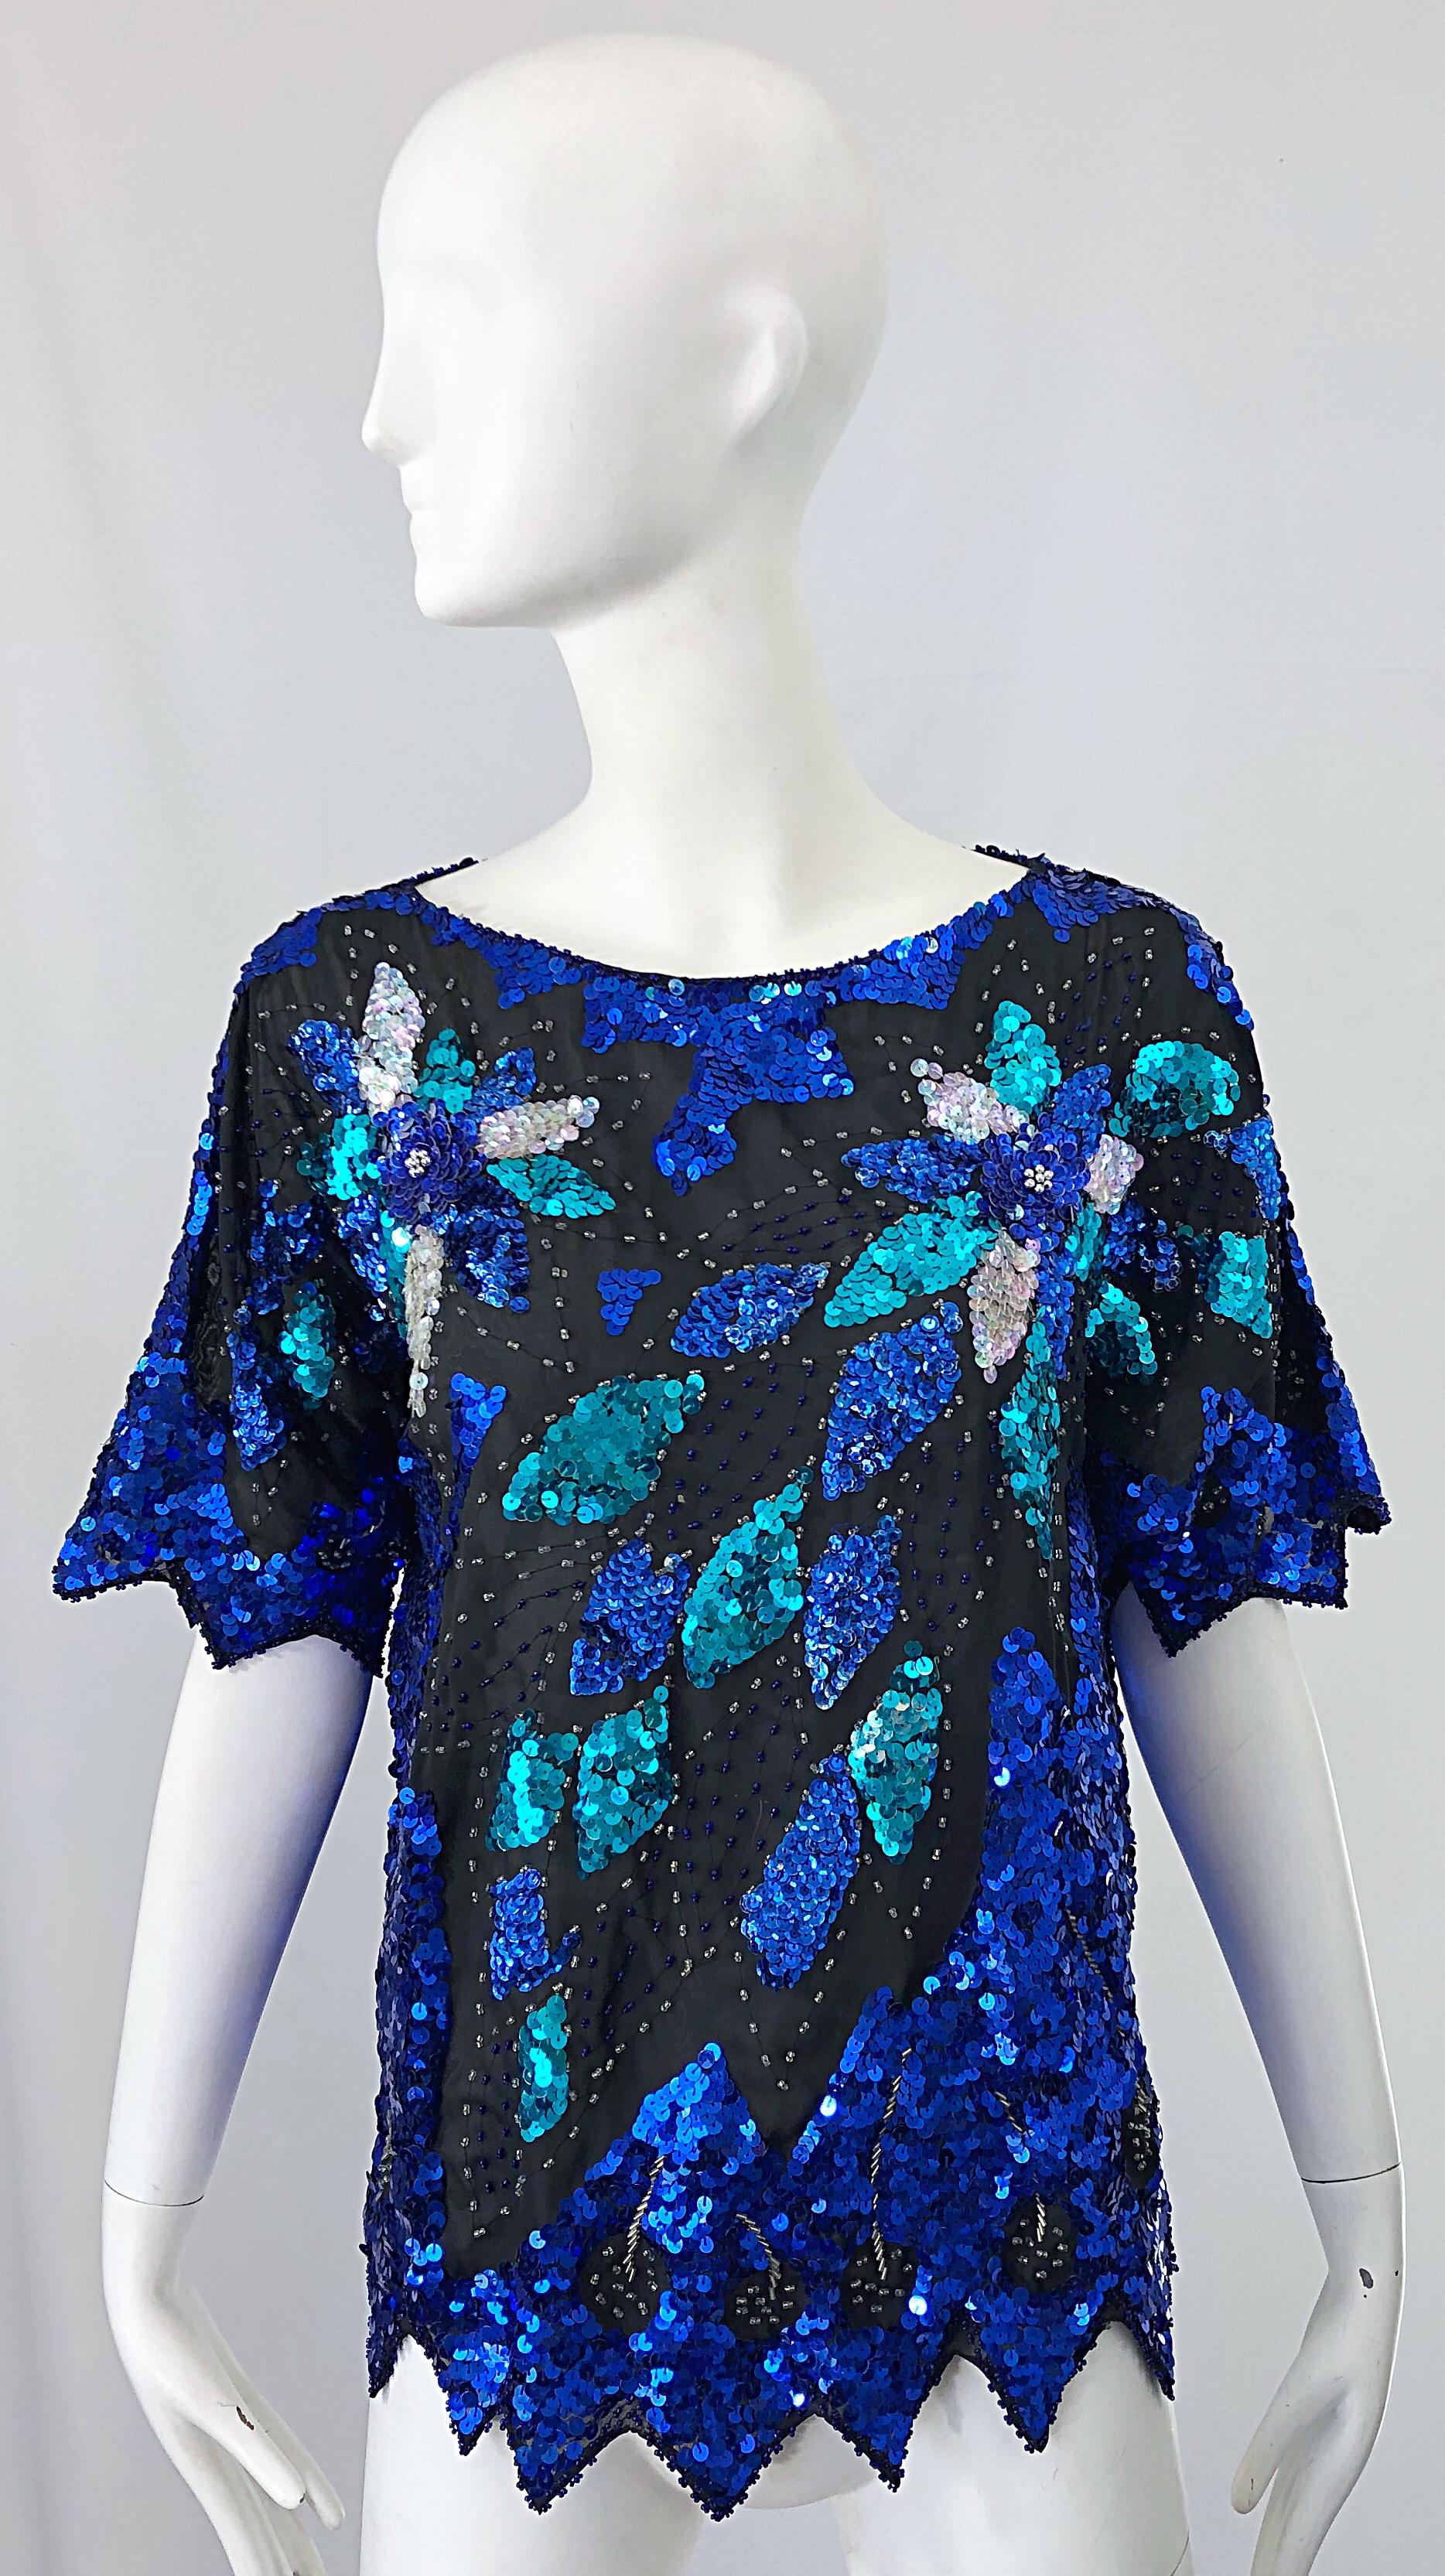 Fabulous vintage 1980s blue, turquoise and silver sequin and beaded larger size silk blouse ! Features black silk with thousands of vibrant blue, turquoise sequins and silver sequins and beads throughout. Scalloped hem and sleeves. Simply slips over